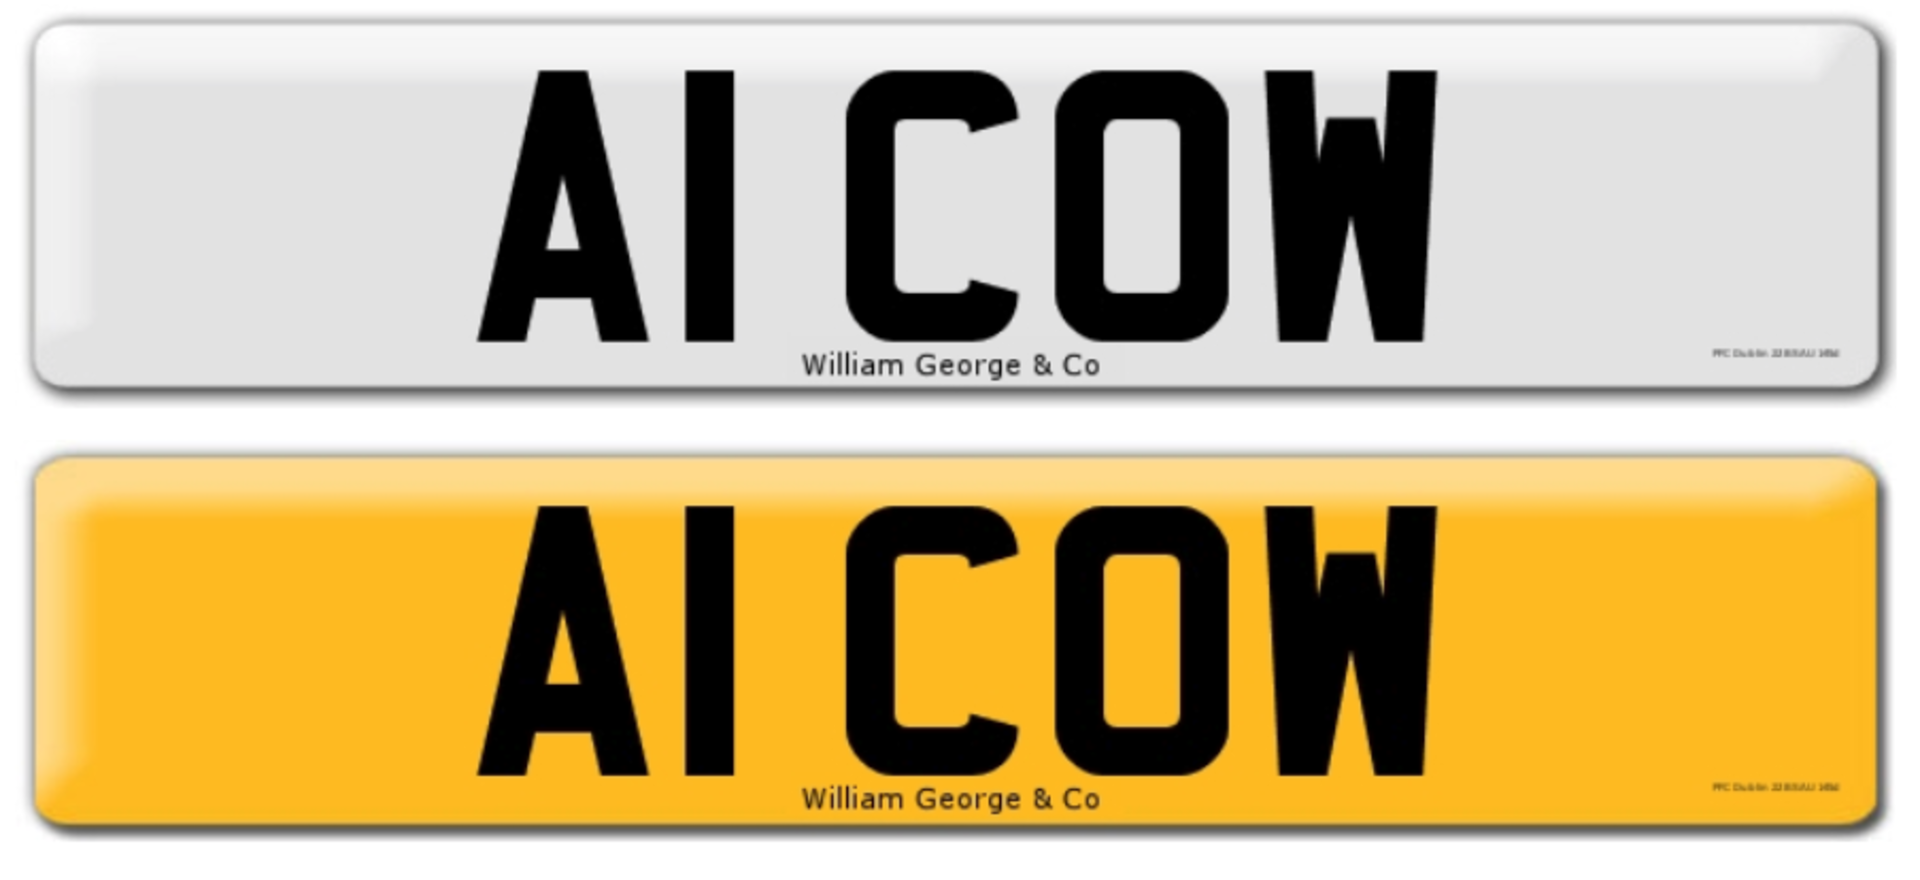 Registration on DVLA retention certificate, ready to transfer A1 COW, This number plate /